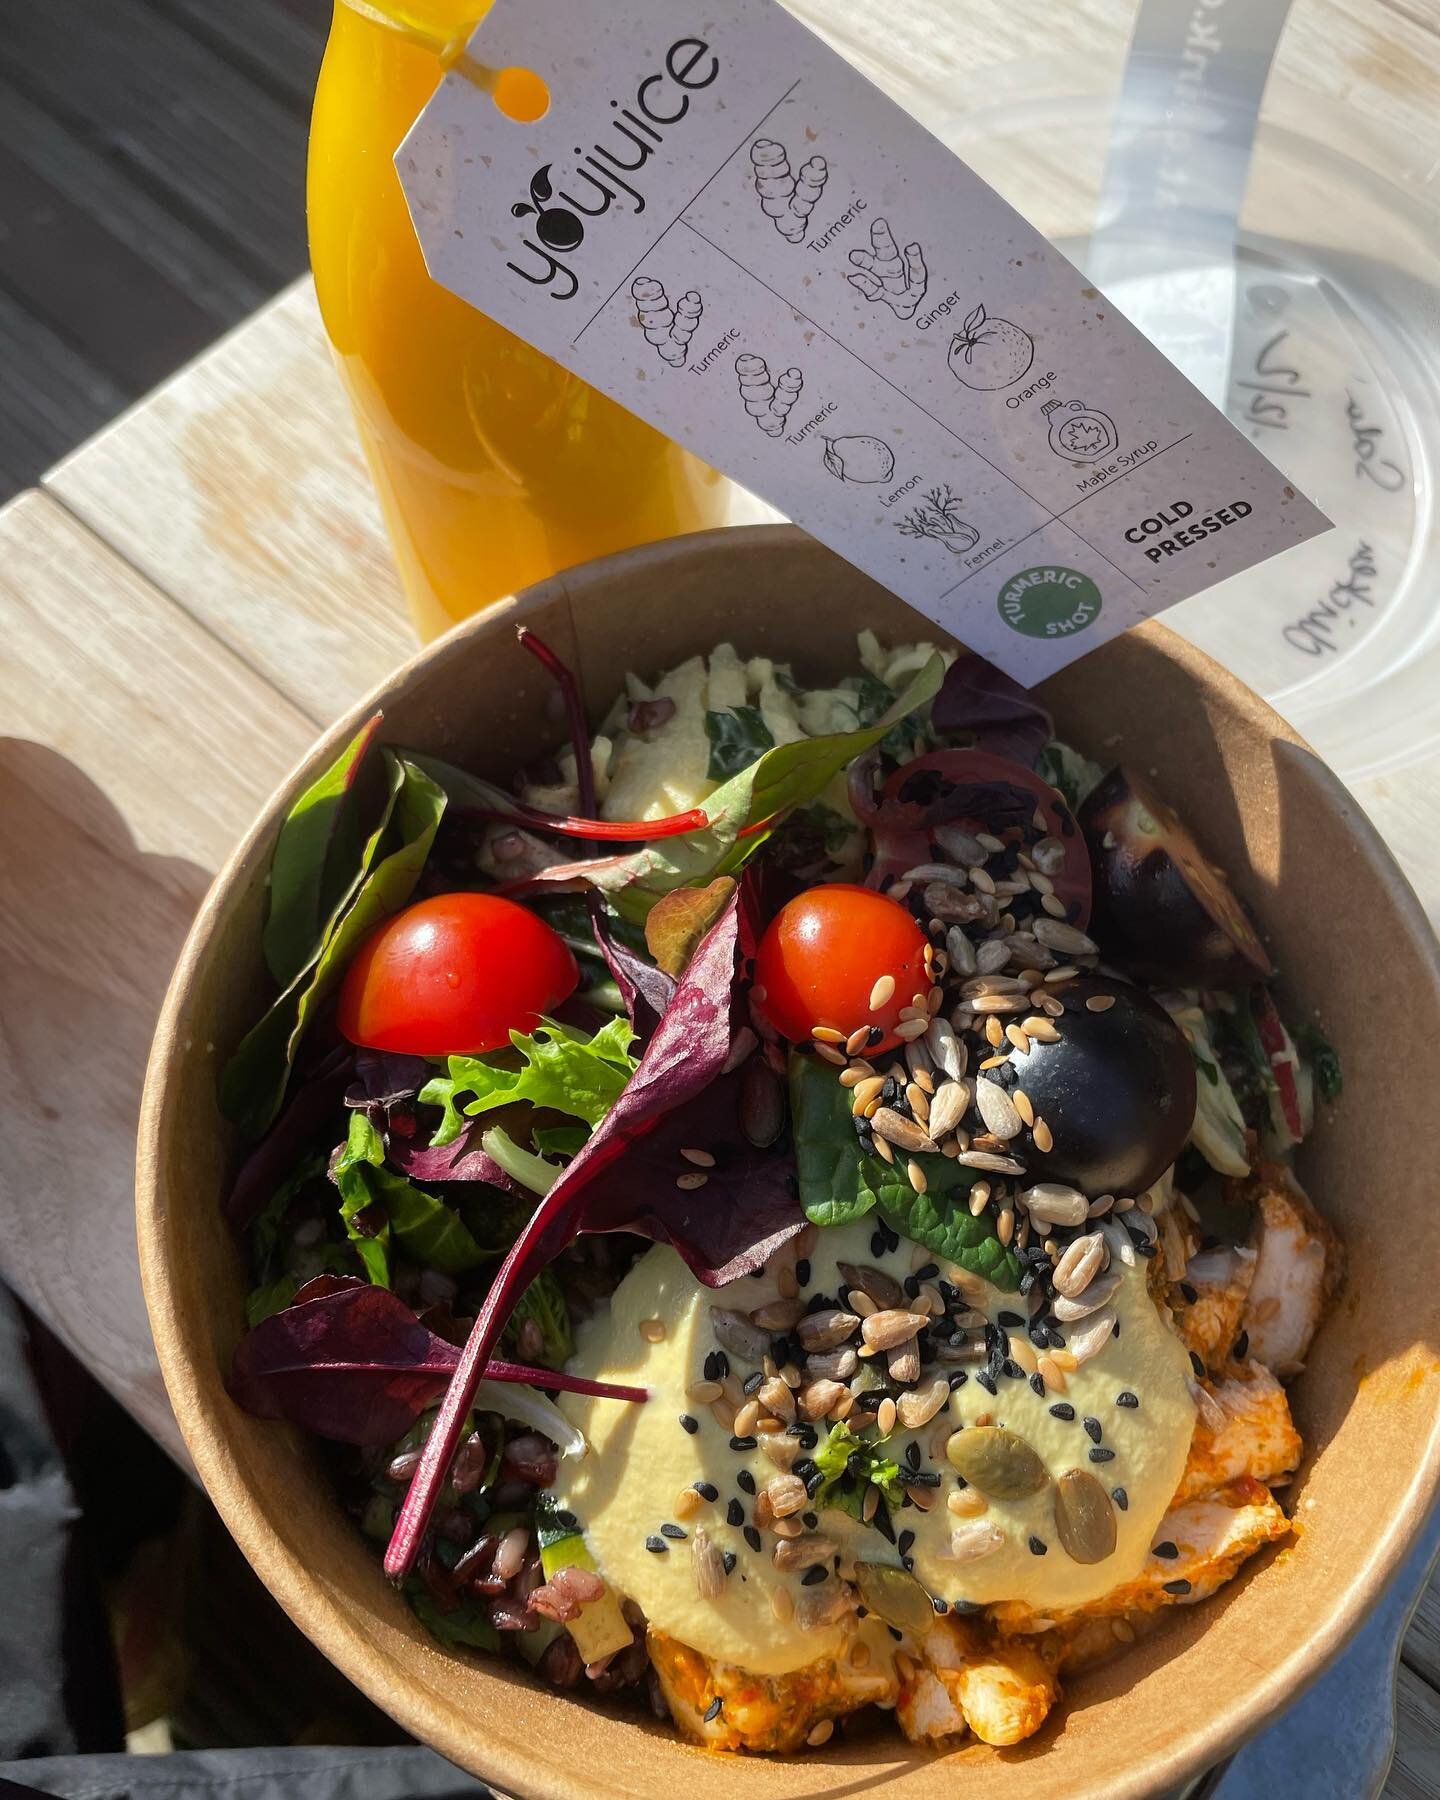 Gorgeous lunch in the sun 🌞 @youjuicecleanse - I love brighton when spring starts to arrive.
 
This morning I was invited to run a wonderful workshop on self-care and how not to burn out with the brilliant @hungrybearmedia - thank you for having me 